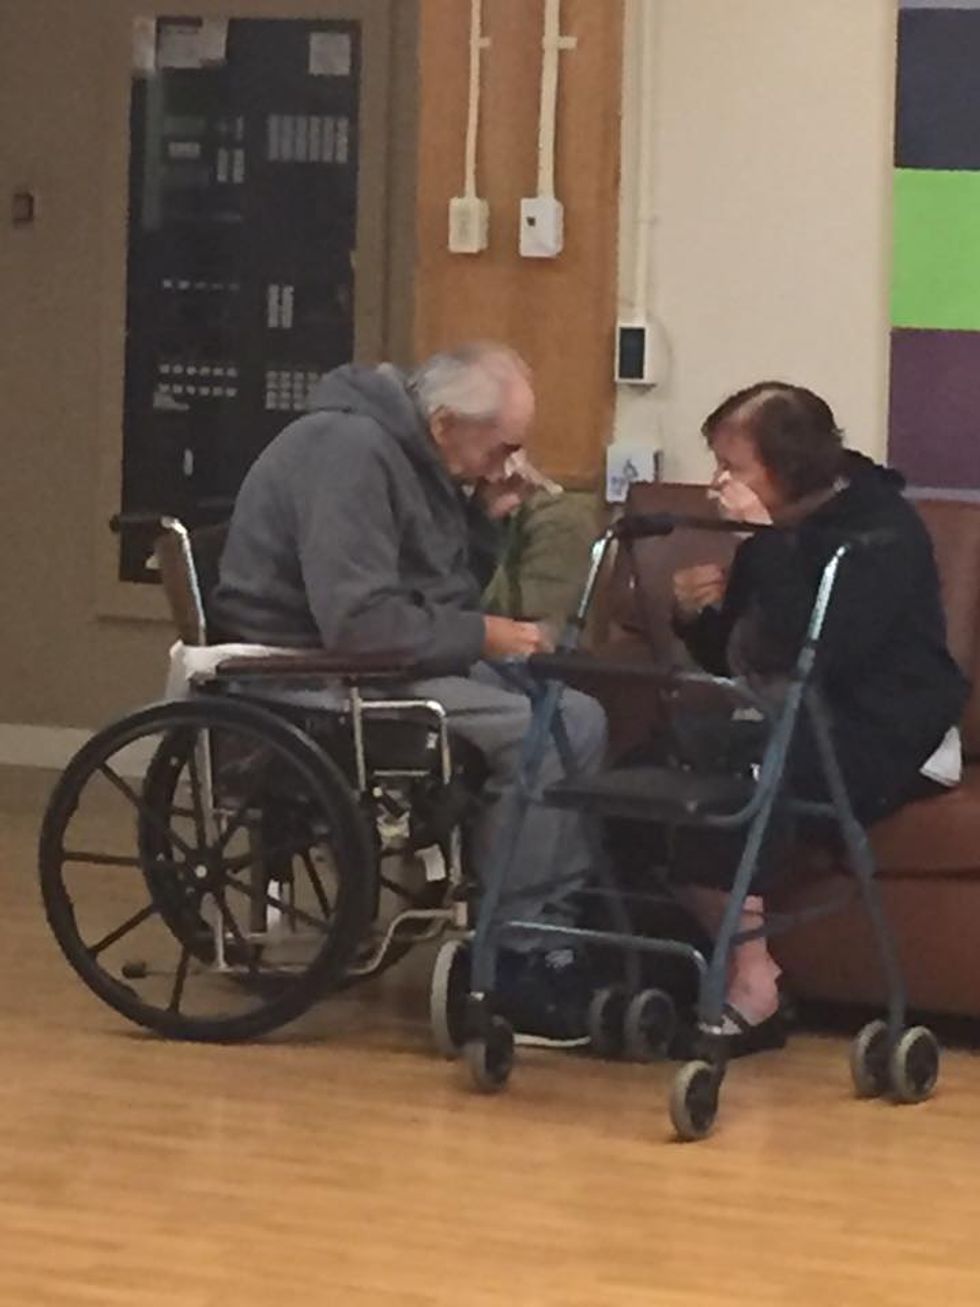 Wolfram and Anita Gottschalk's tearful goodbye as they go back to their separate care homes